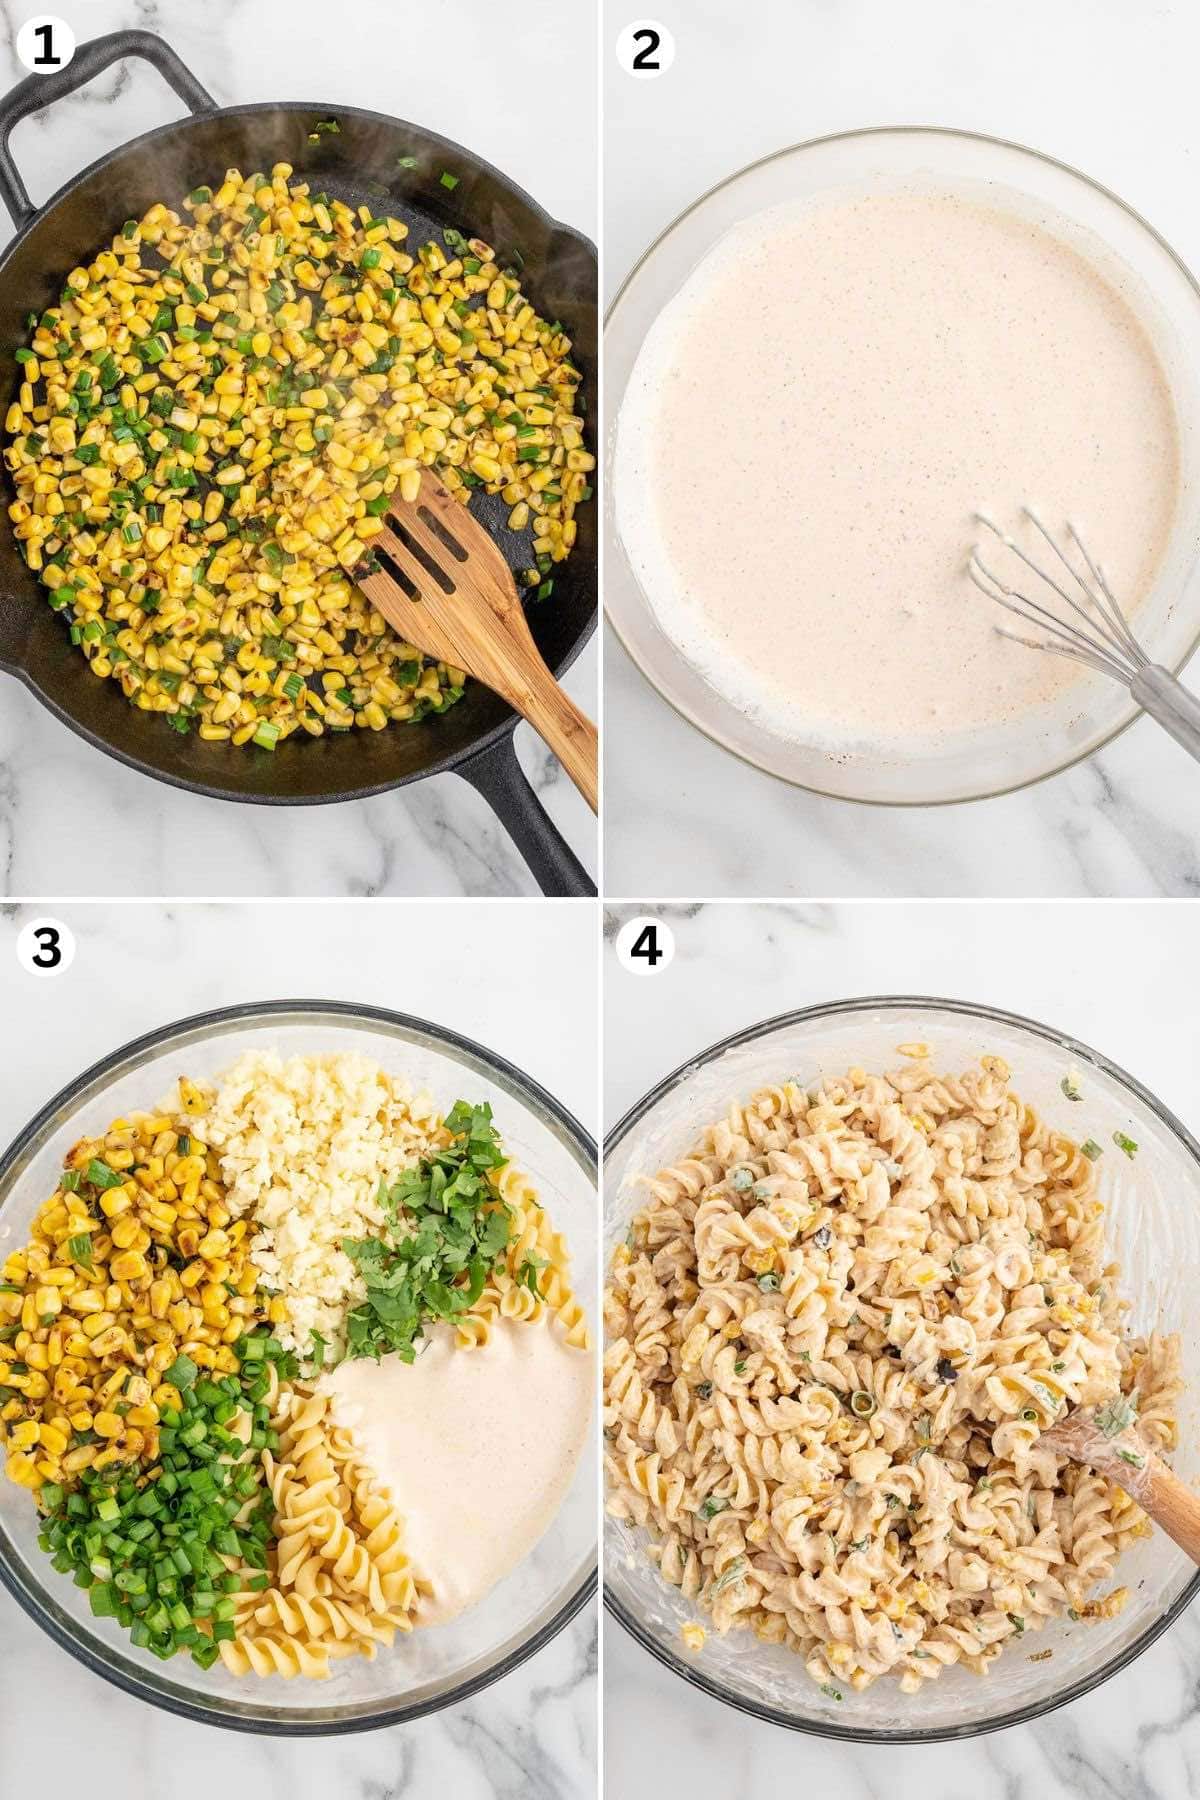 Cook the corn in the skillet. Make the dressing. In a large bowl, mix the ingredients.